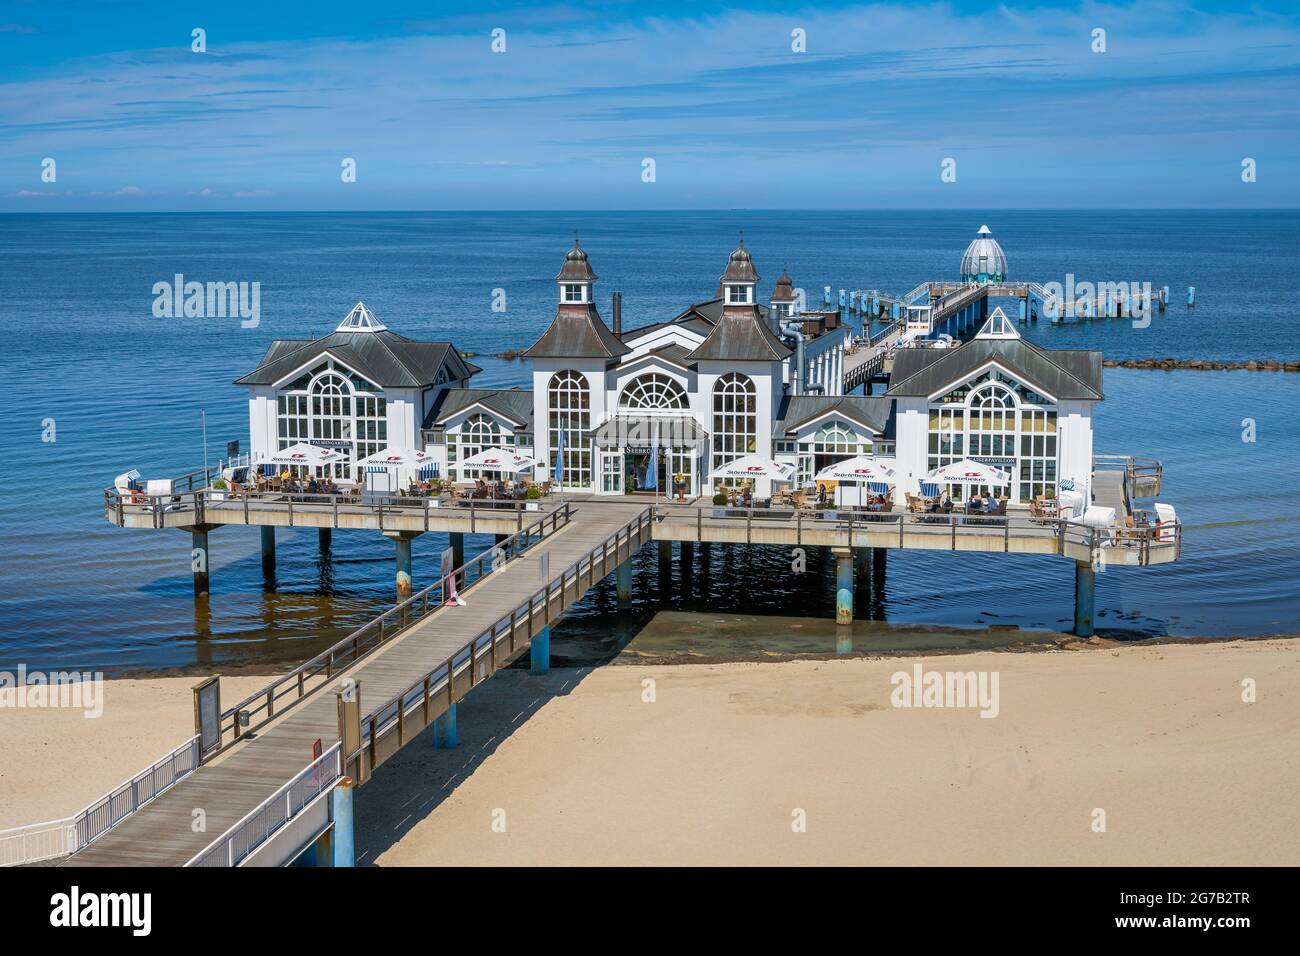 Sellin Pier on the Rügen island at the Baltic Sea, Germany Stock Photo